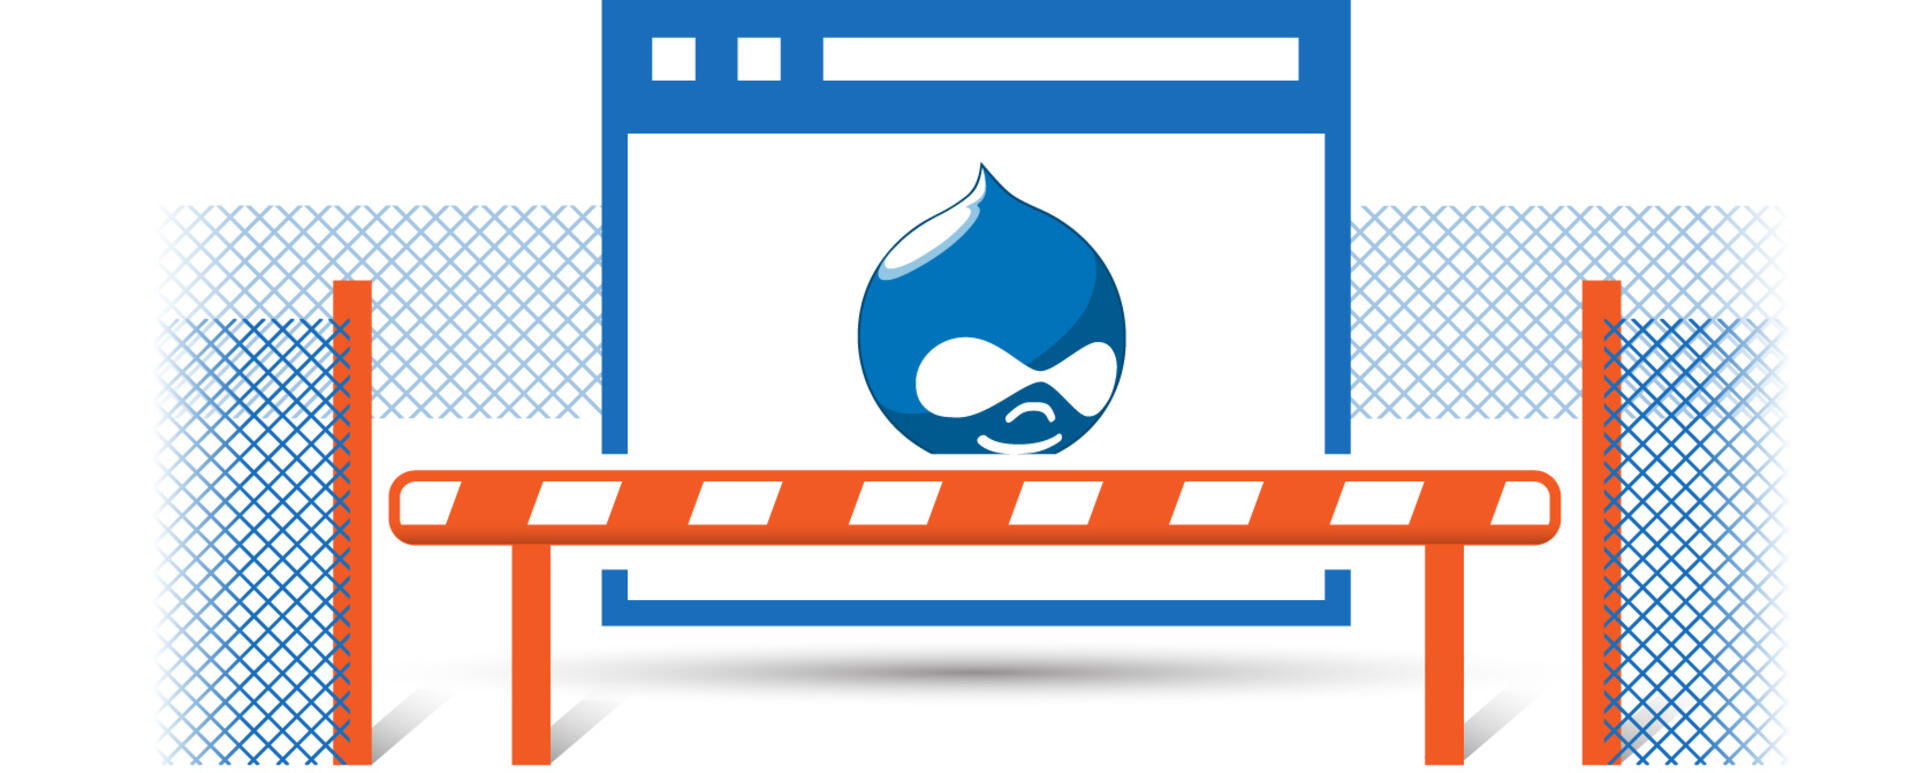 The illustration shows Site with Drupal logo guarded securely hidden behind a net